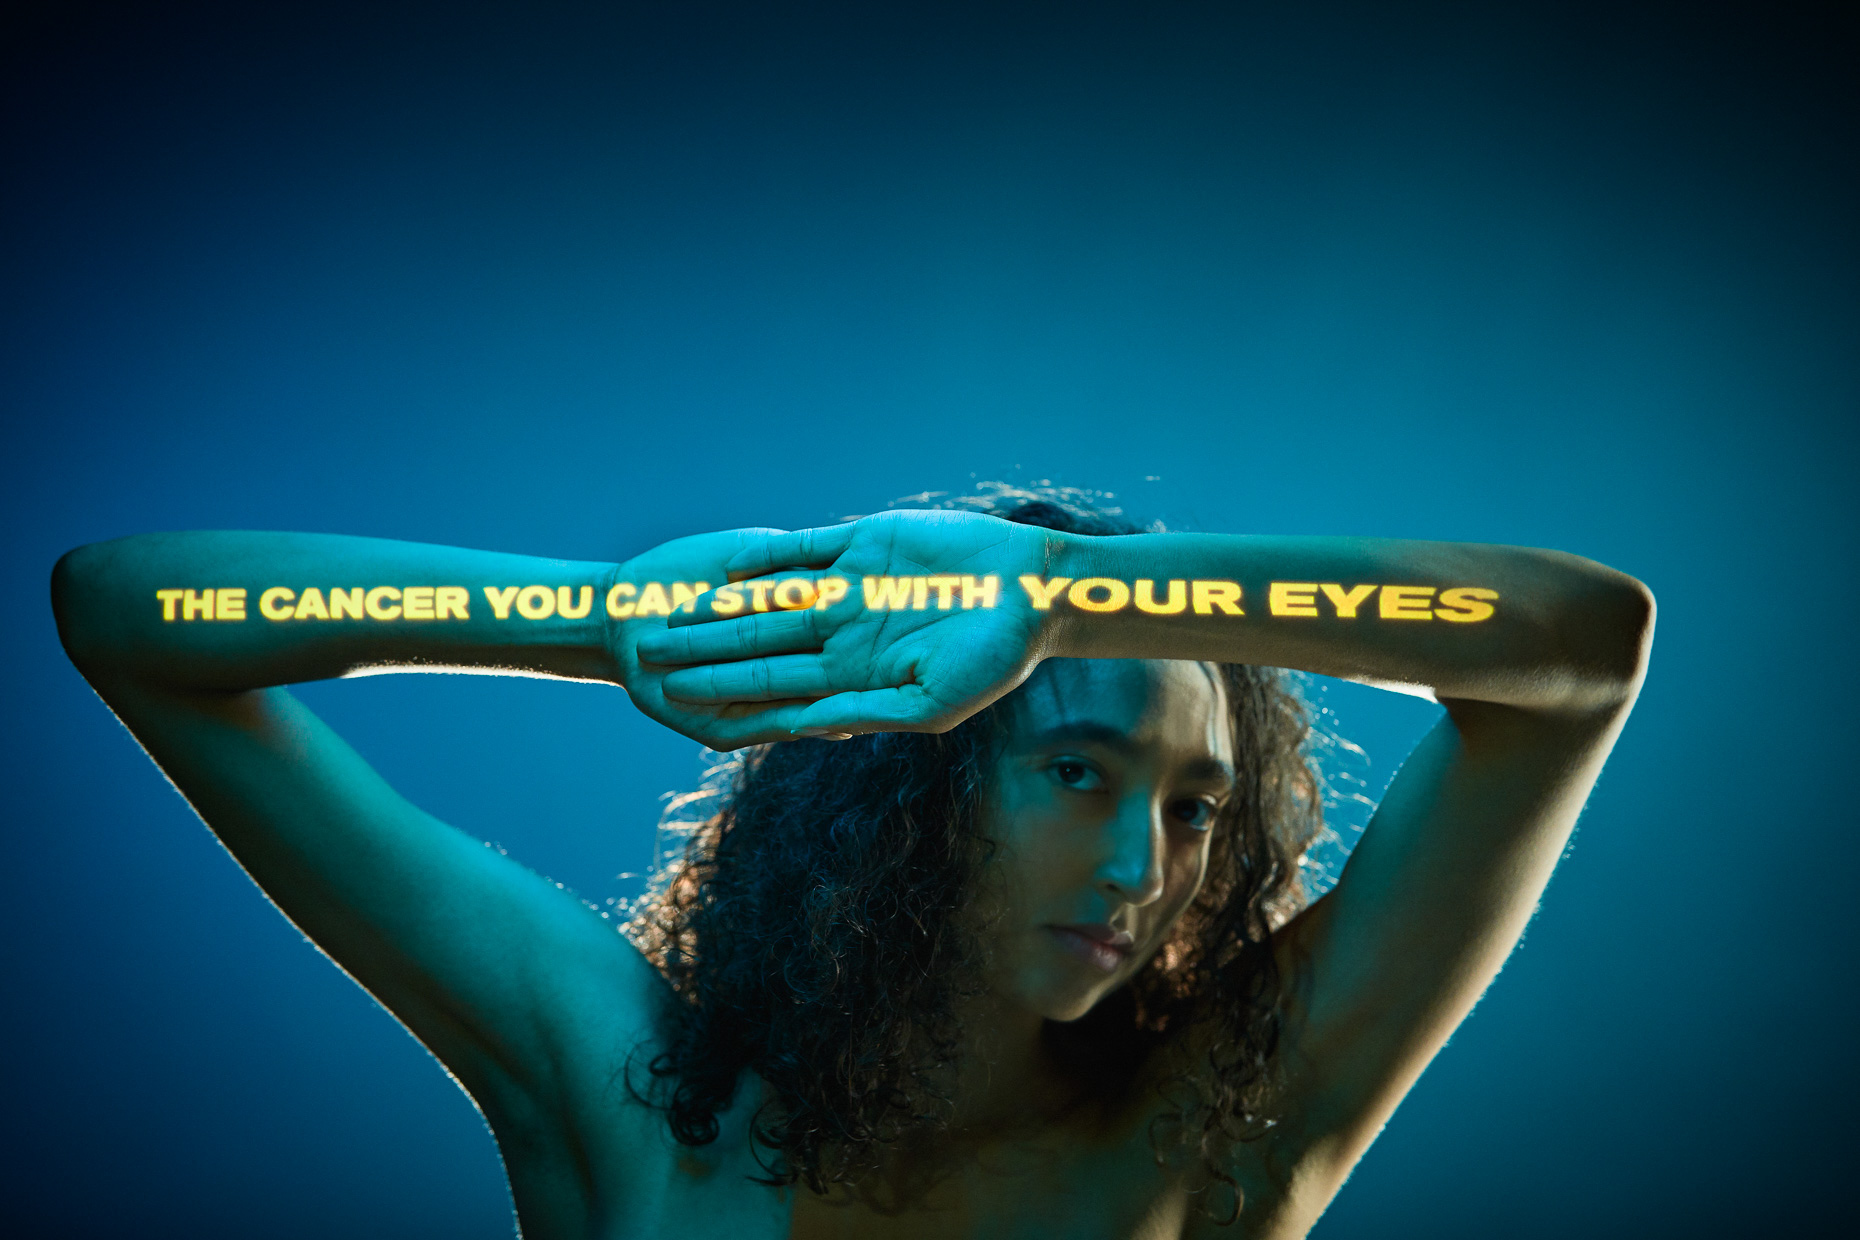 Start Seeing Melanoma campaign for OHSU war on skin cancer with dancer Kayla. Words projected onto her skin read "The cancer you can stop with your eyes" by Andy Batt